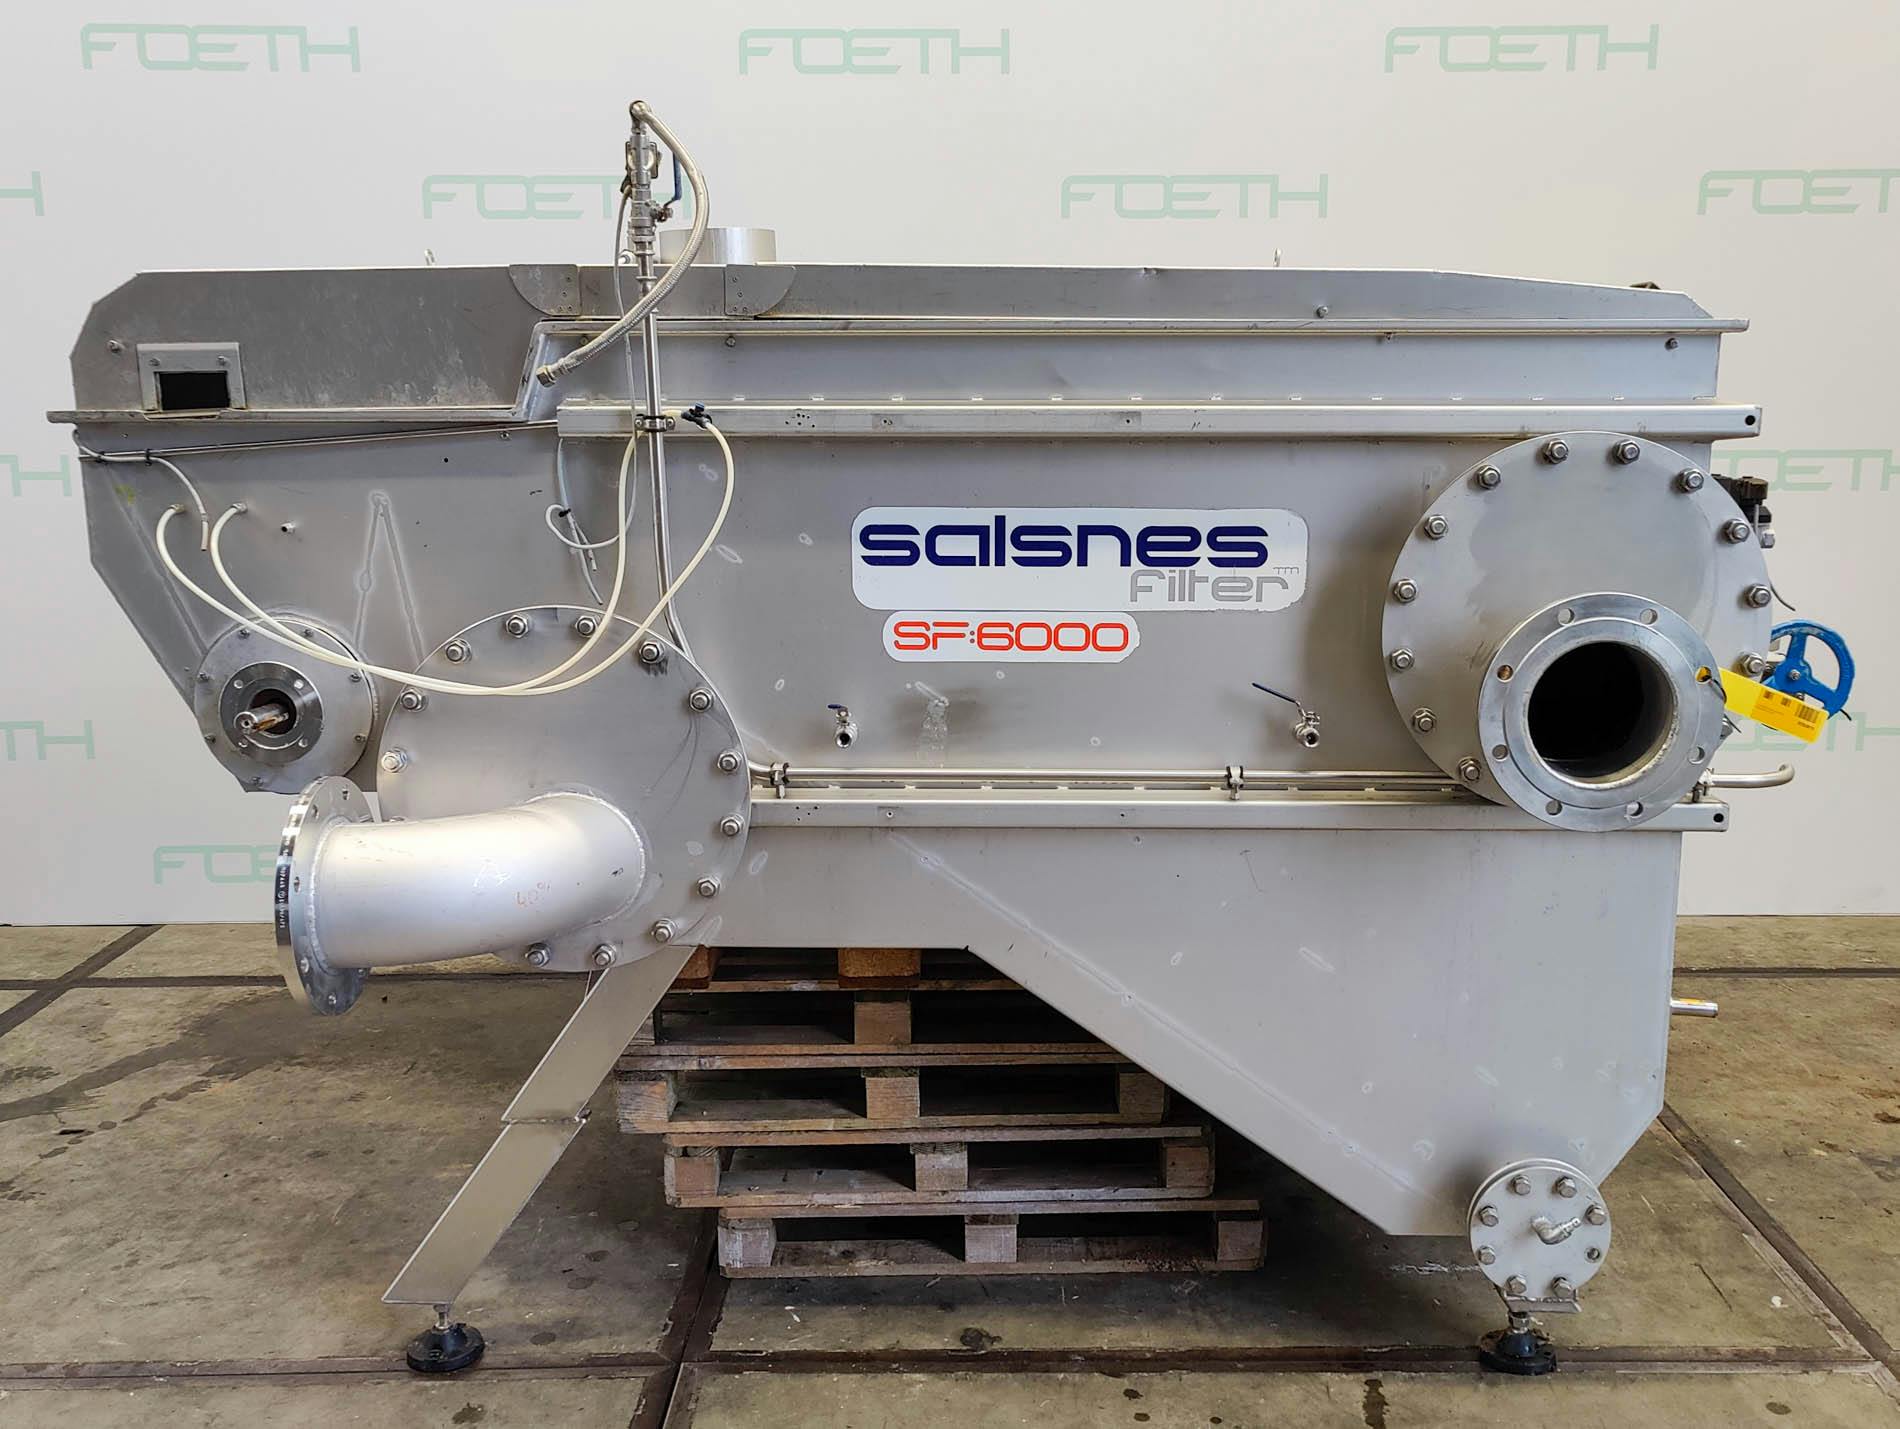 Salsnes 6000 "Solids Separation with Integrated Sludge Thickening and Dewatering" - Miscellaneous filter